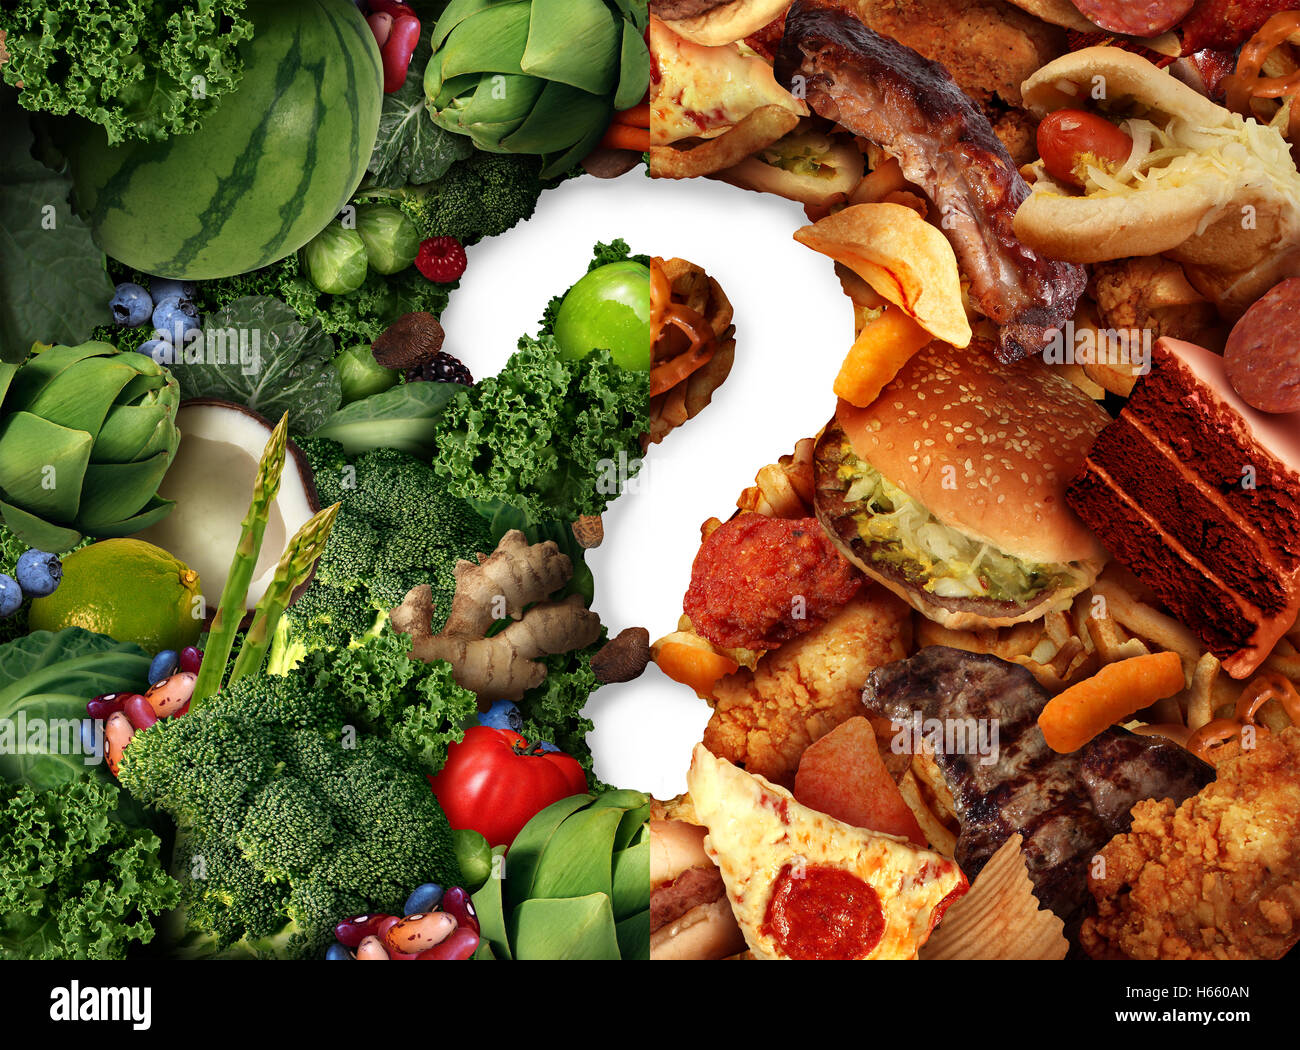 Nutrition confusion idea and diet decision concept and food choices dilemma between healthy good fresh fruit and vegetables or greasy cholesterol rich fast food as a question mark trying to decide what to eat. Stock Photo